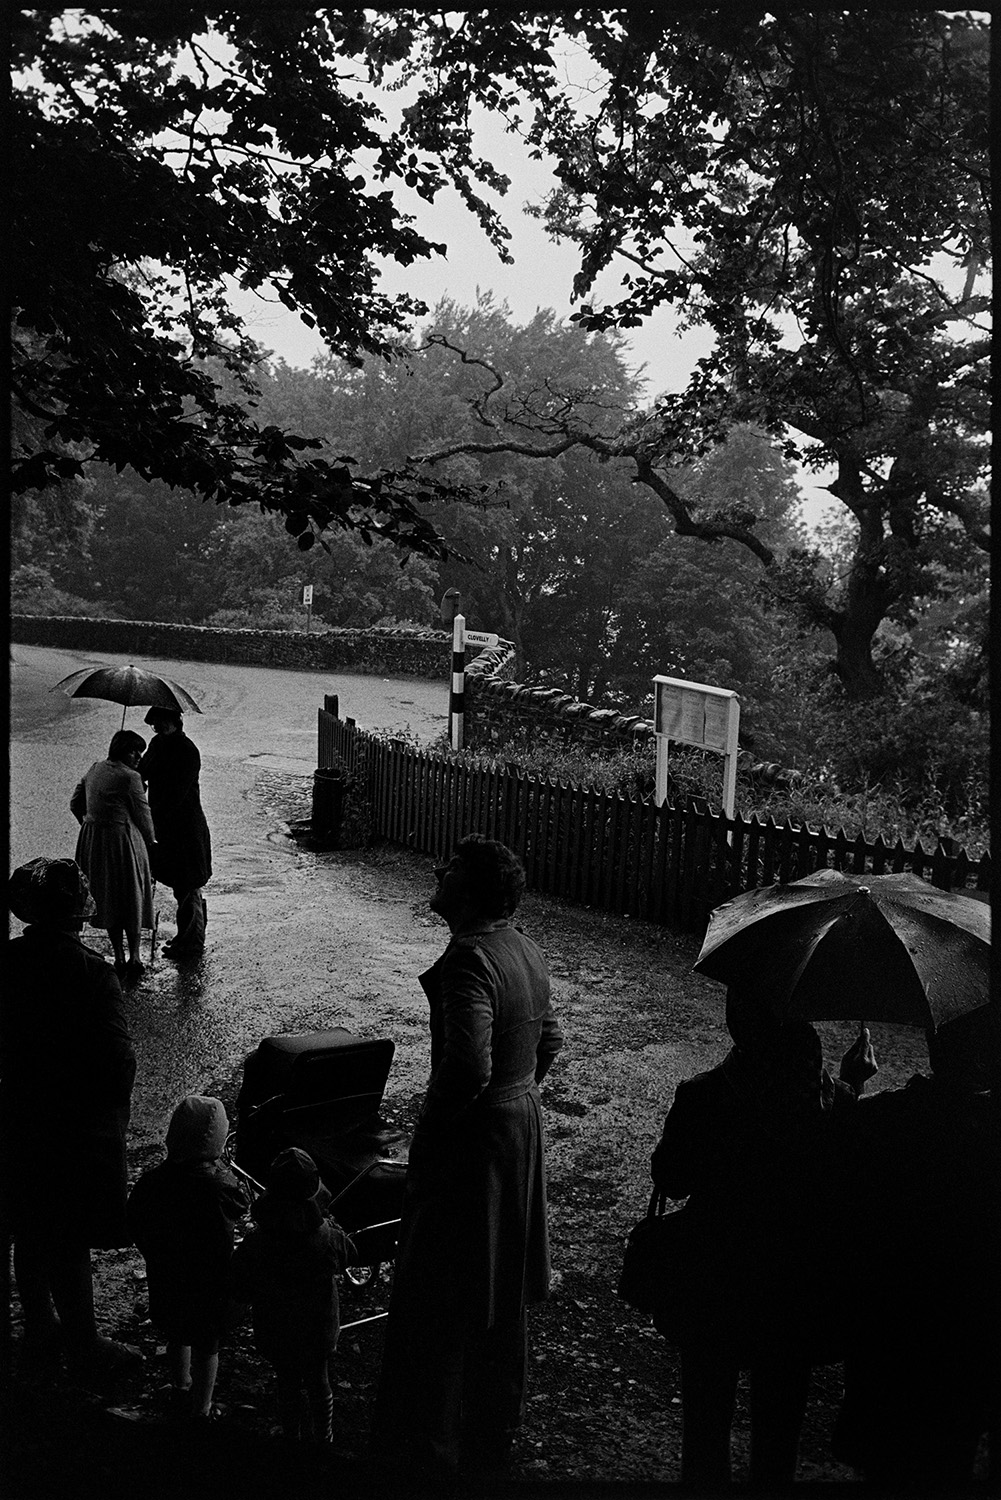 Tourists in the rain at entrance to Clovelly, umbrellas.
[Tourists in the rain, holding umbrellas, about to walk down the wooded valley at Clovelly. One woman has a pram and two small children.]